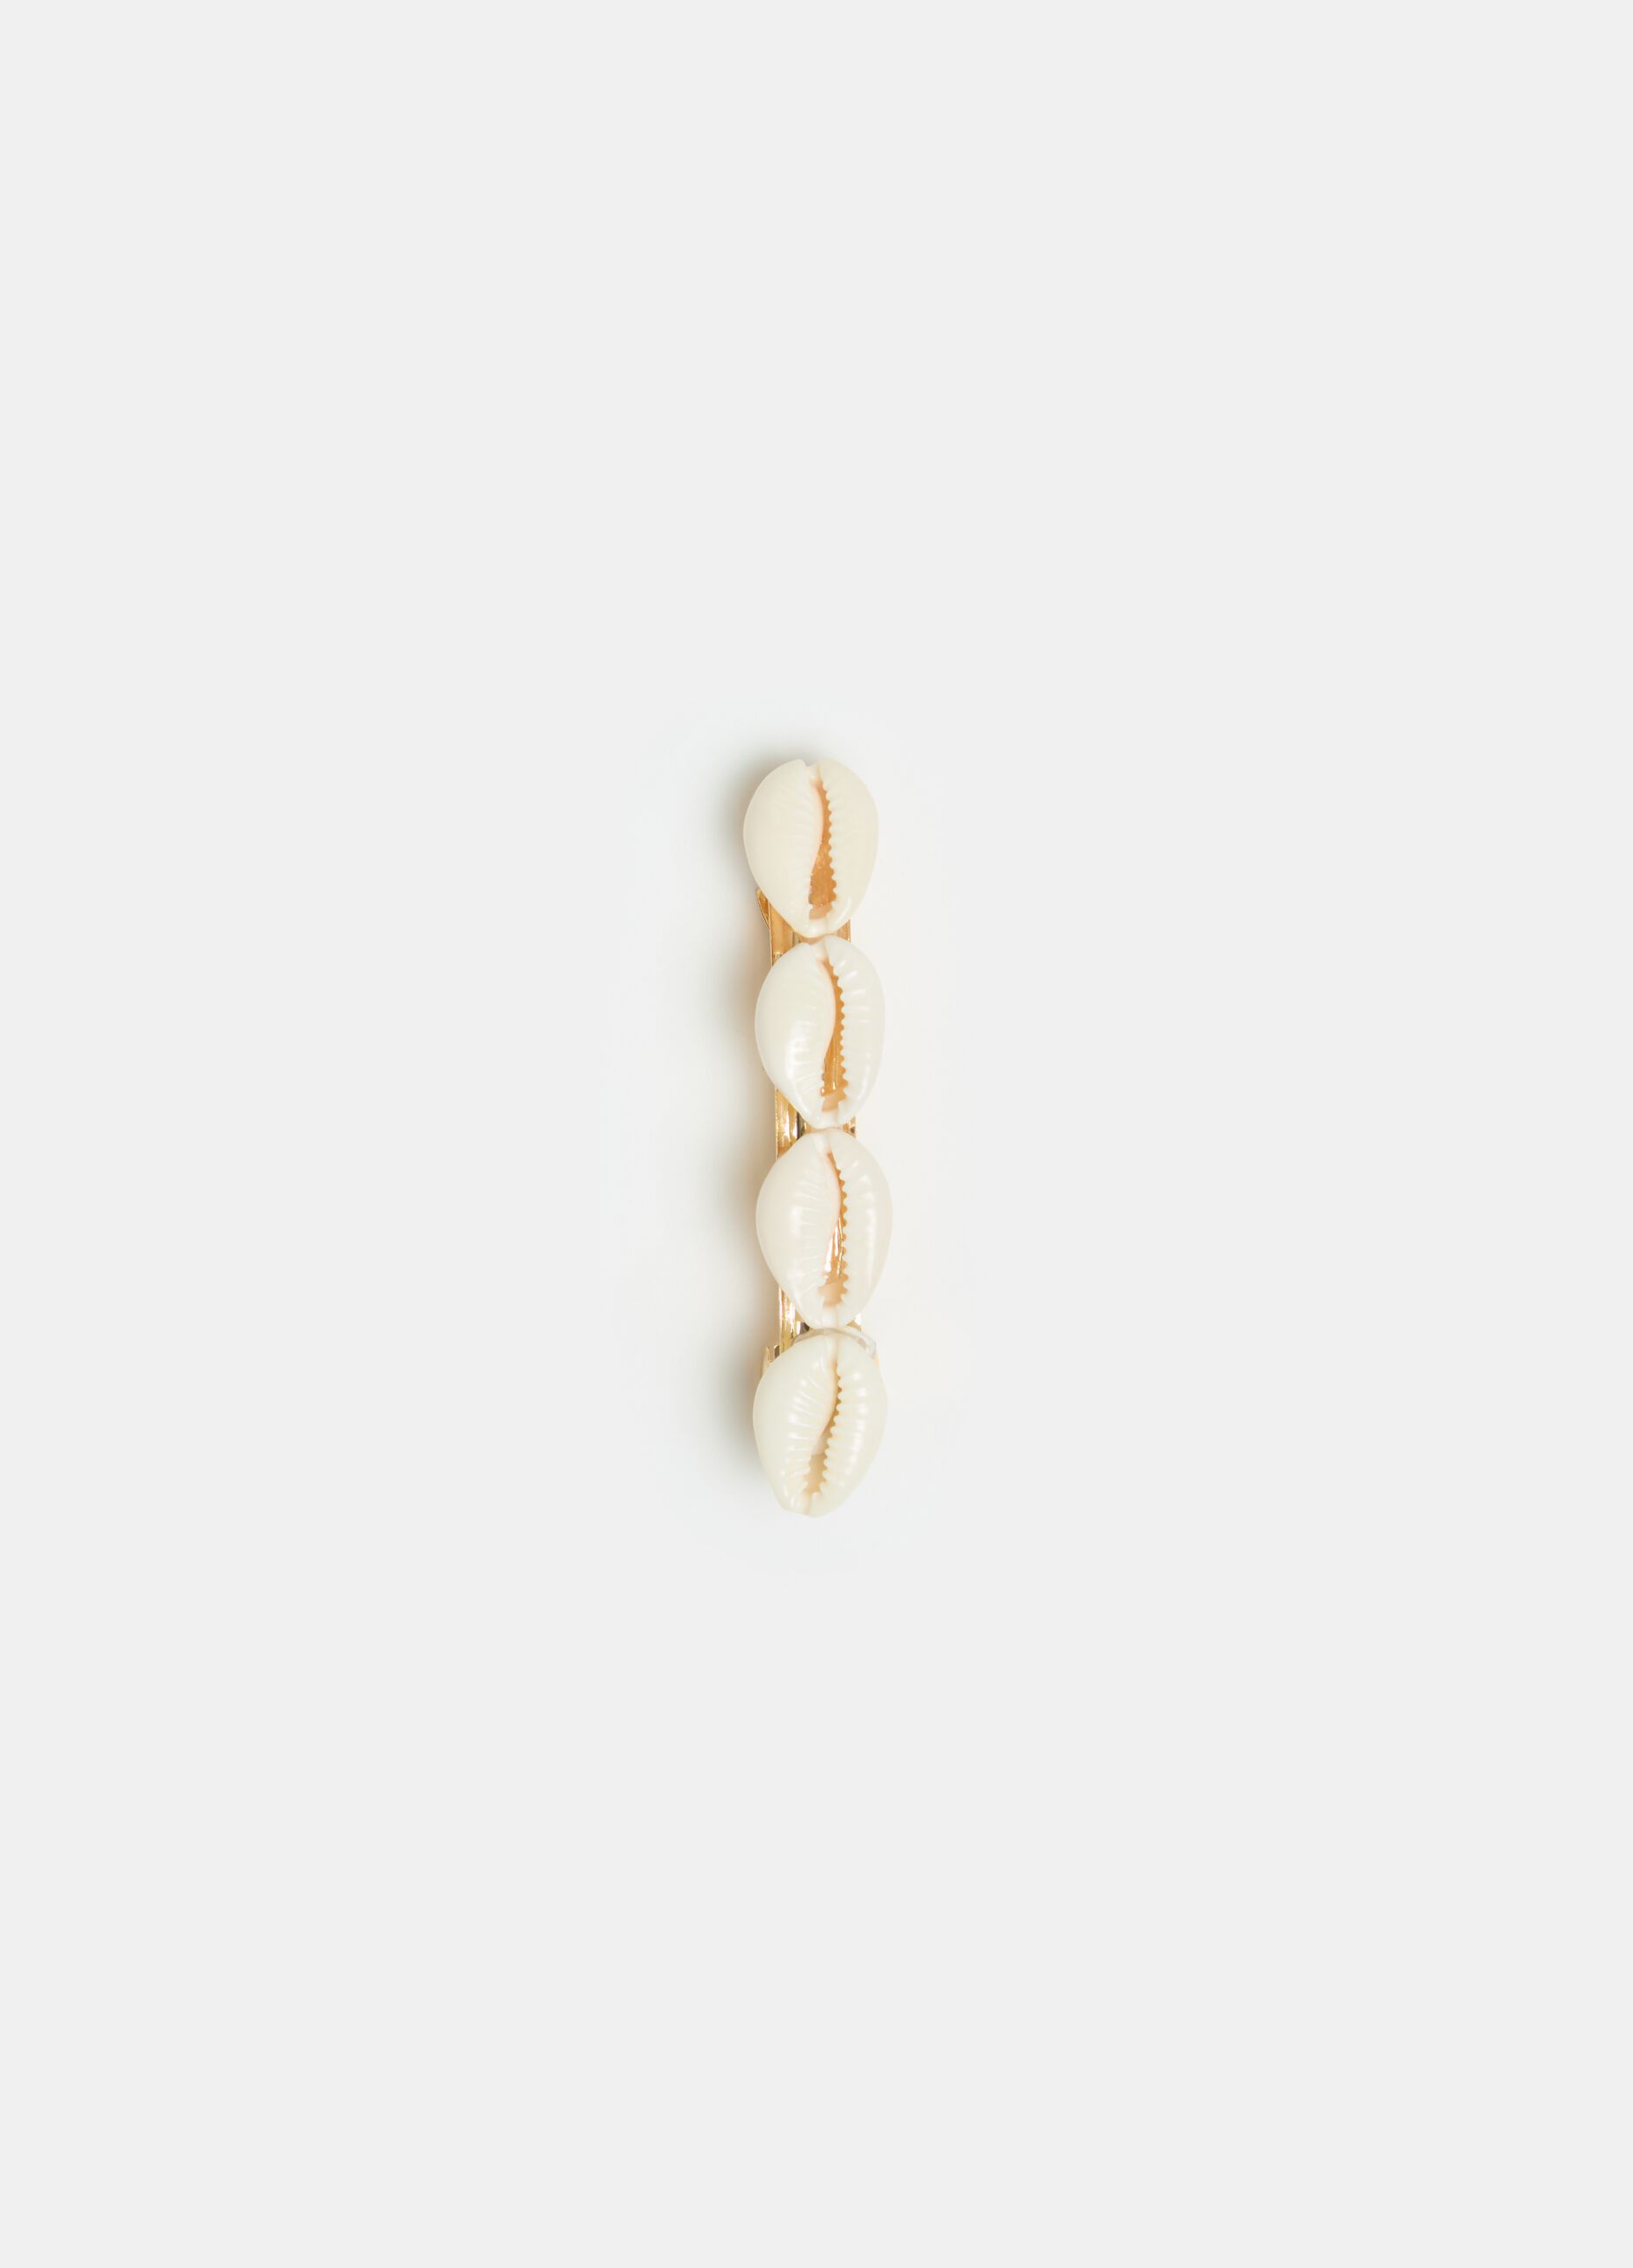 Hair clip with shells